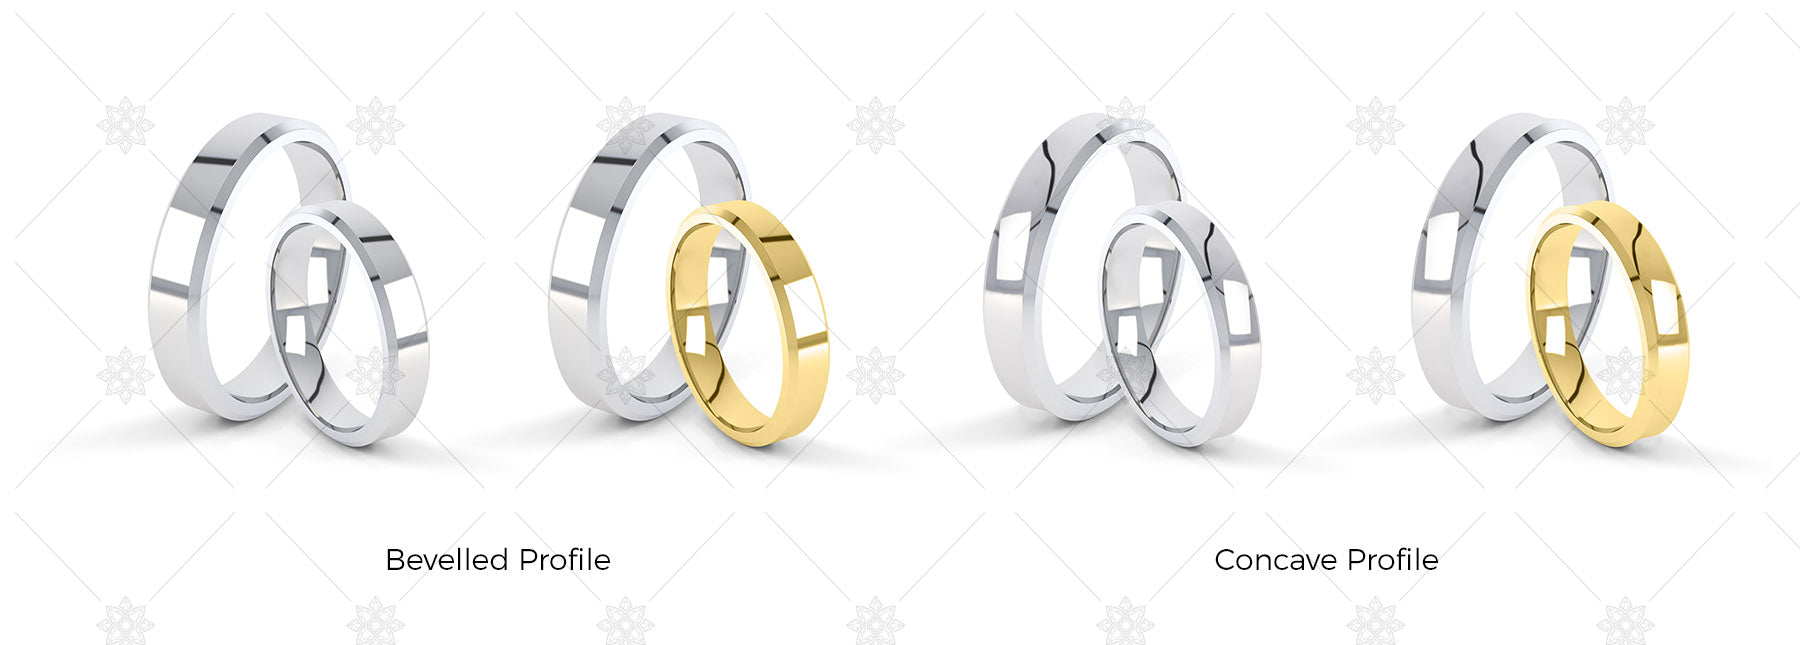 Wedding rings double profile images retail pack